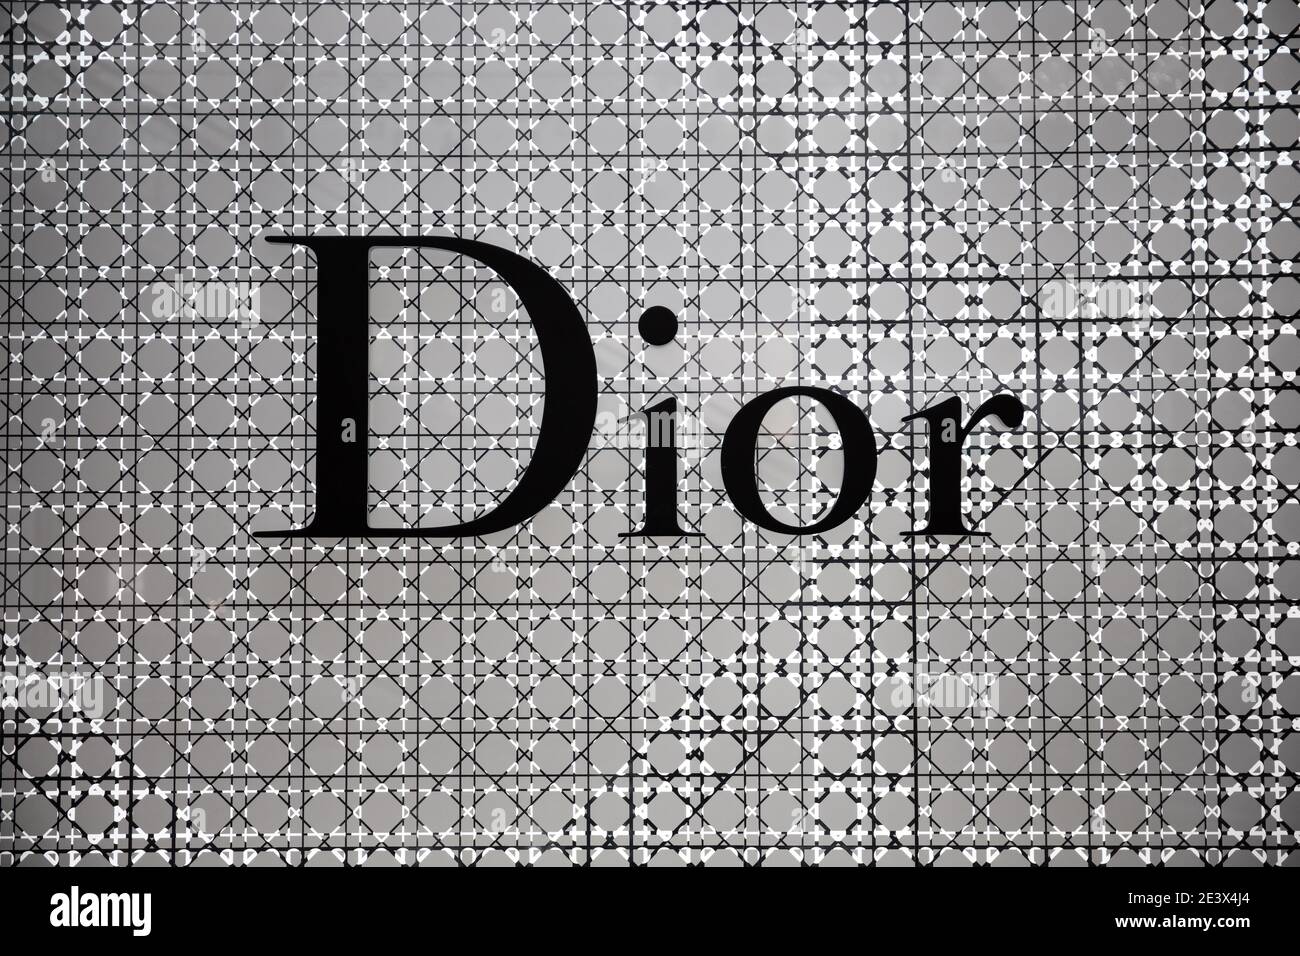 Christian dior logo hi-res stock photography and images - Alamy